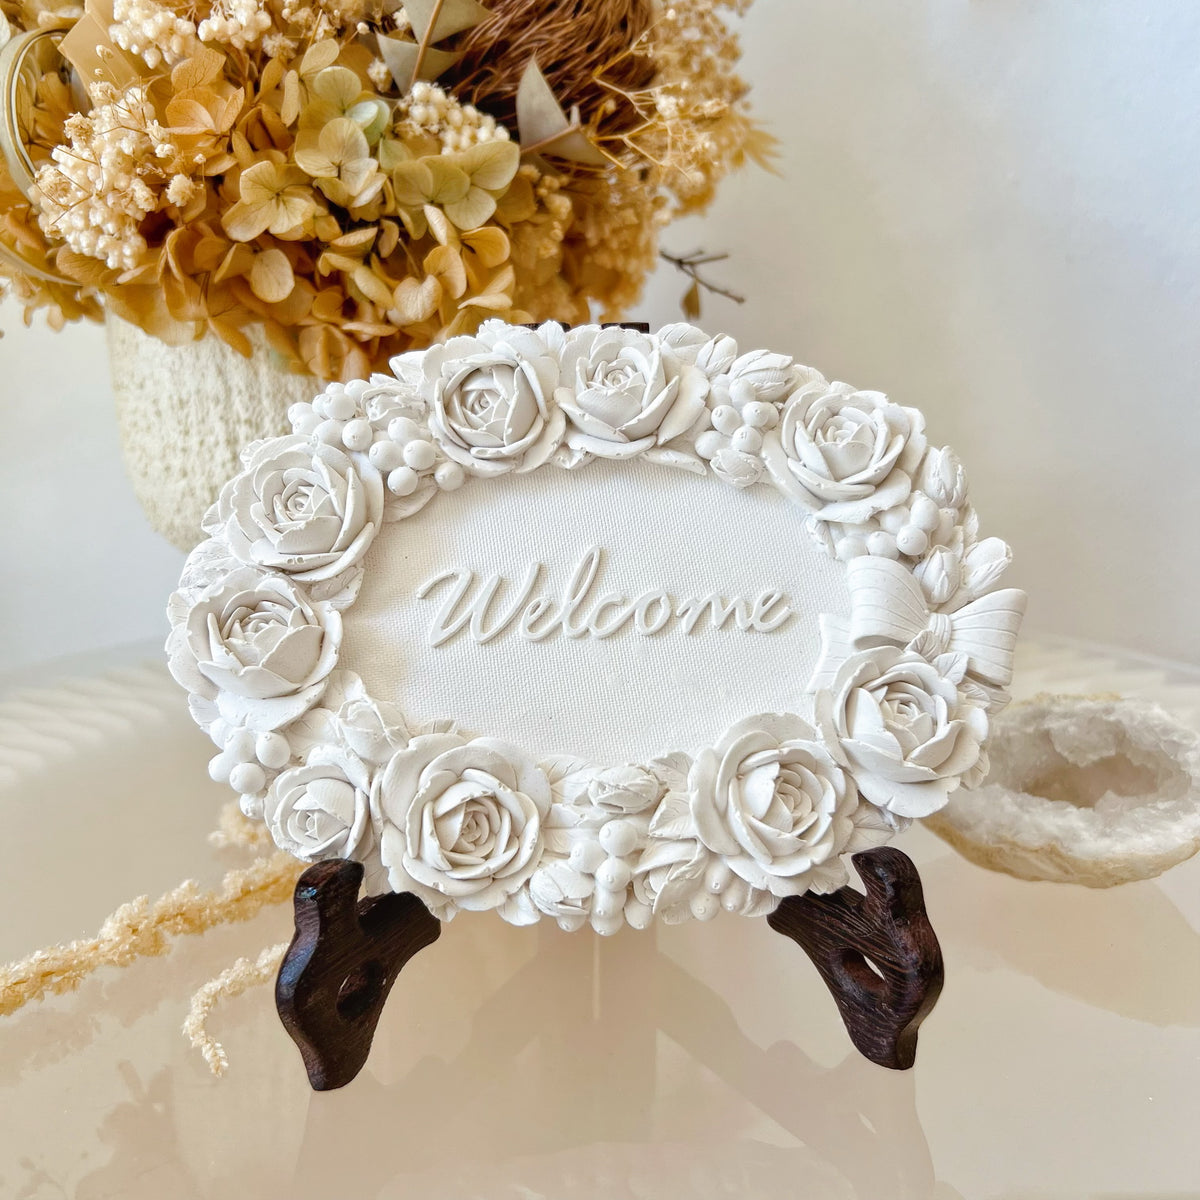 Rose Wreath Welcome Sign Scented Artwork Air Freshener - LMJ Candles